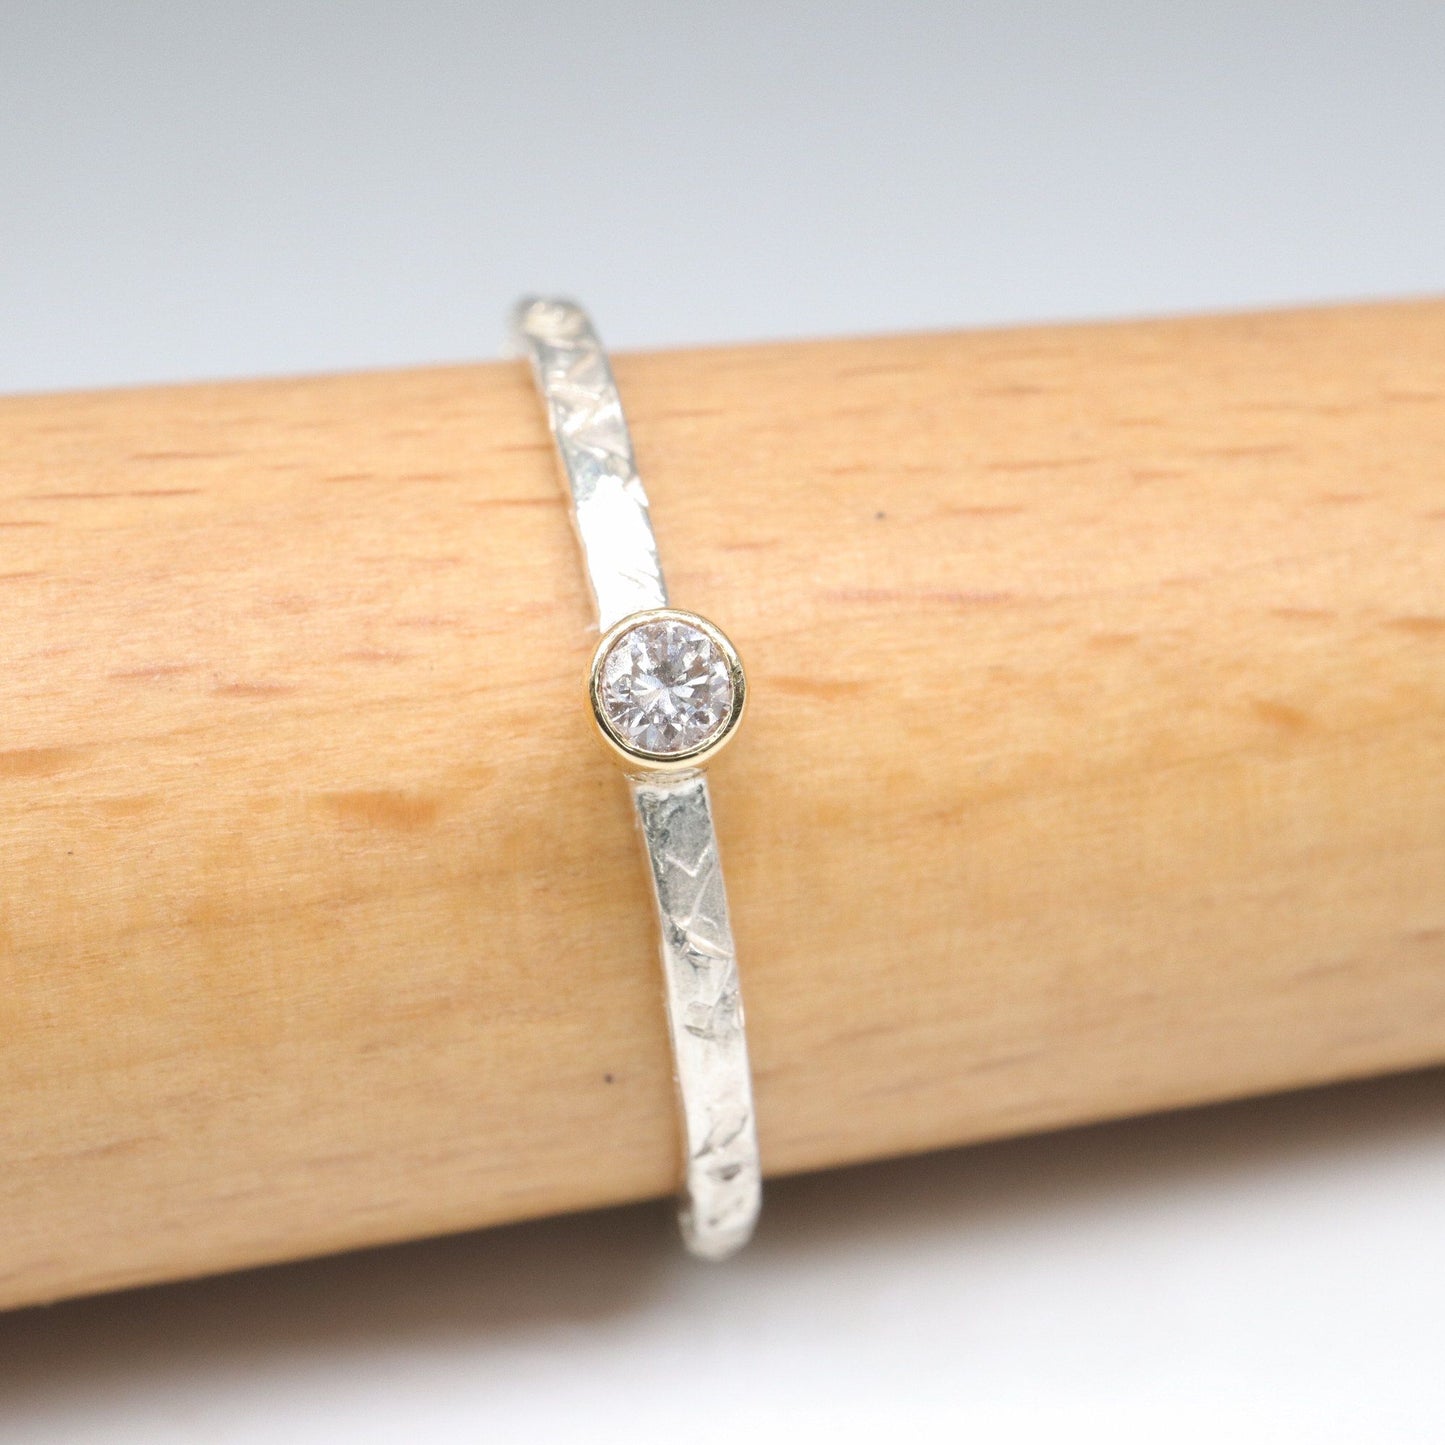 Diamond 18ct gold and silver stacking ring, Striding Edge design.